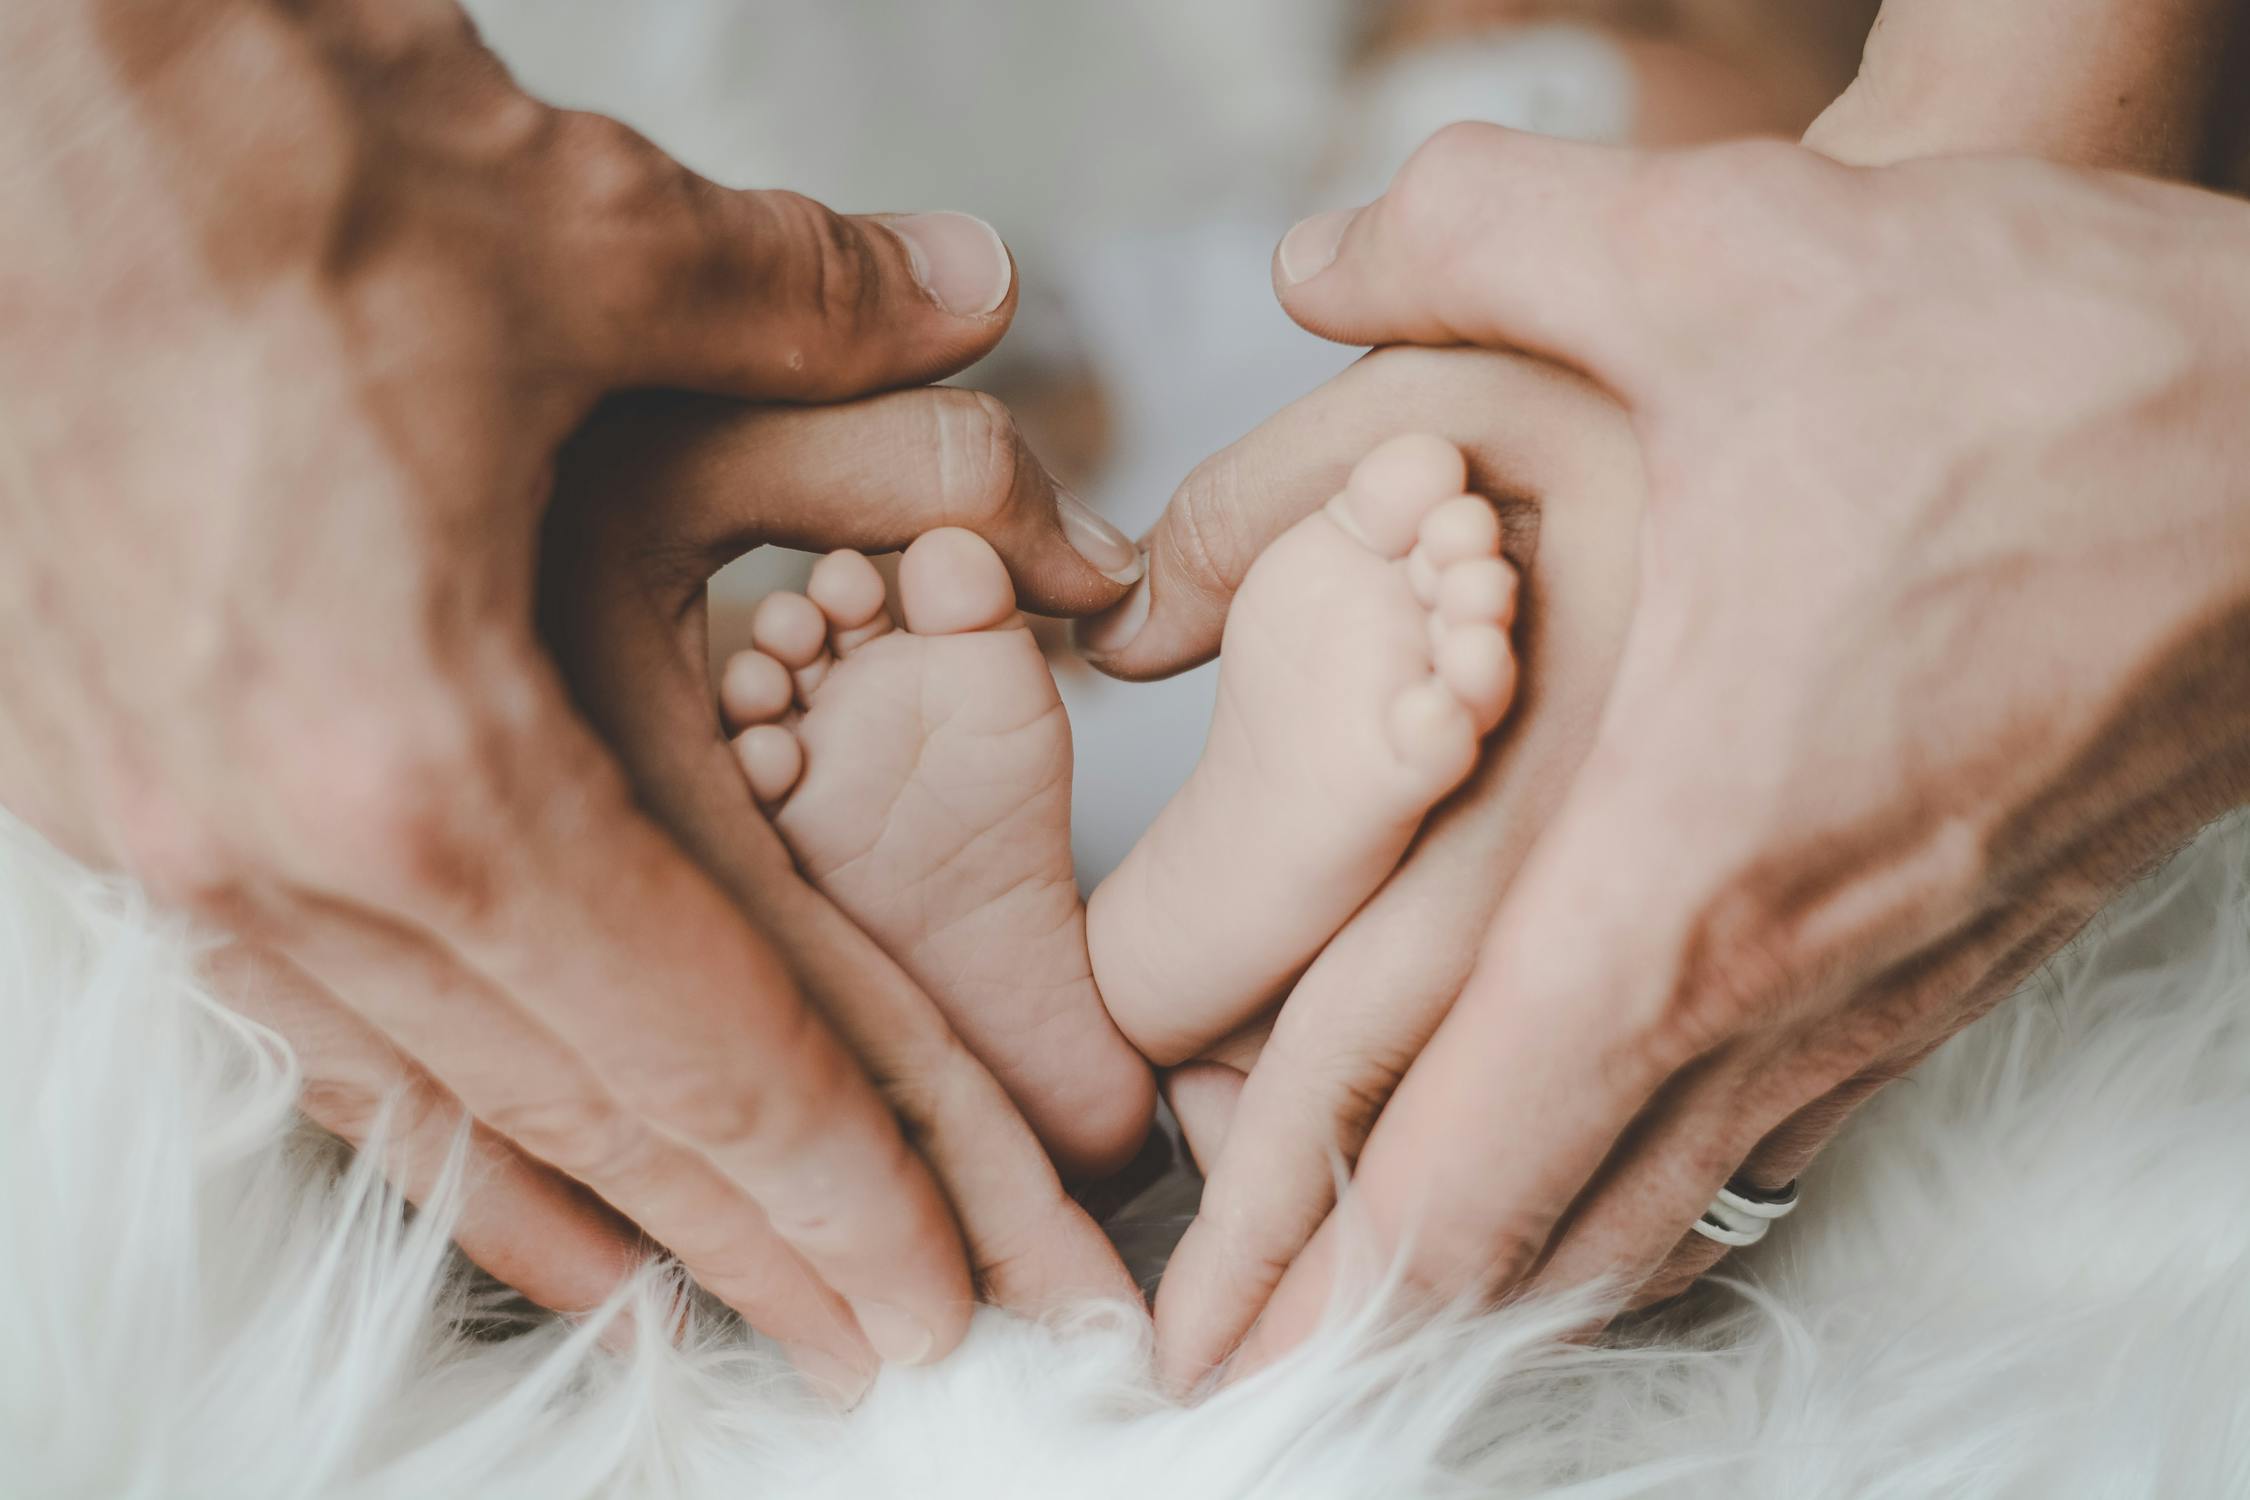 A close-up of two parents’ hands forming a heart around their baby’s feet.